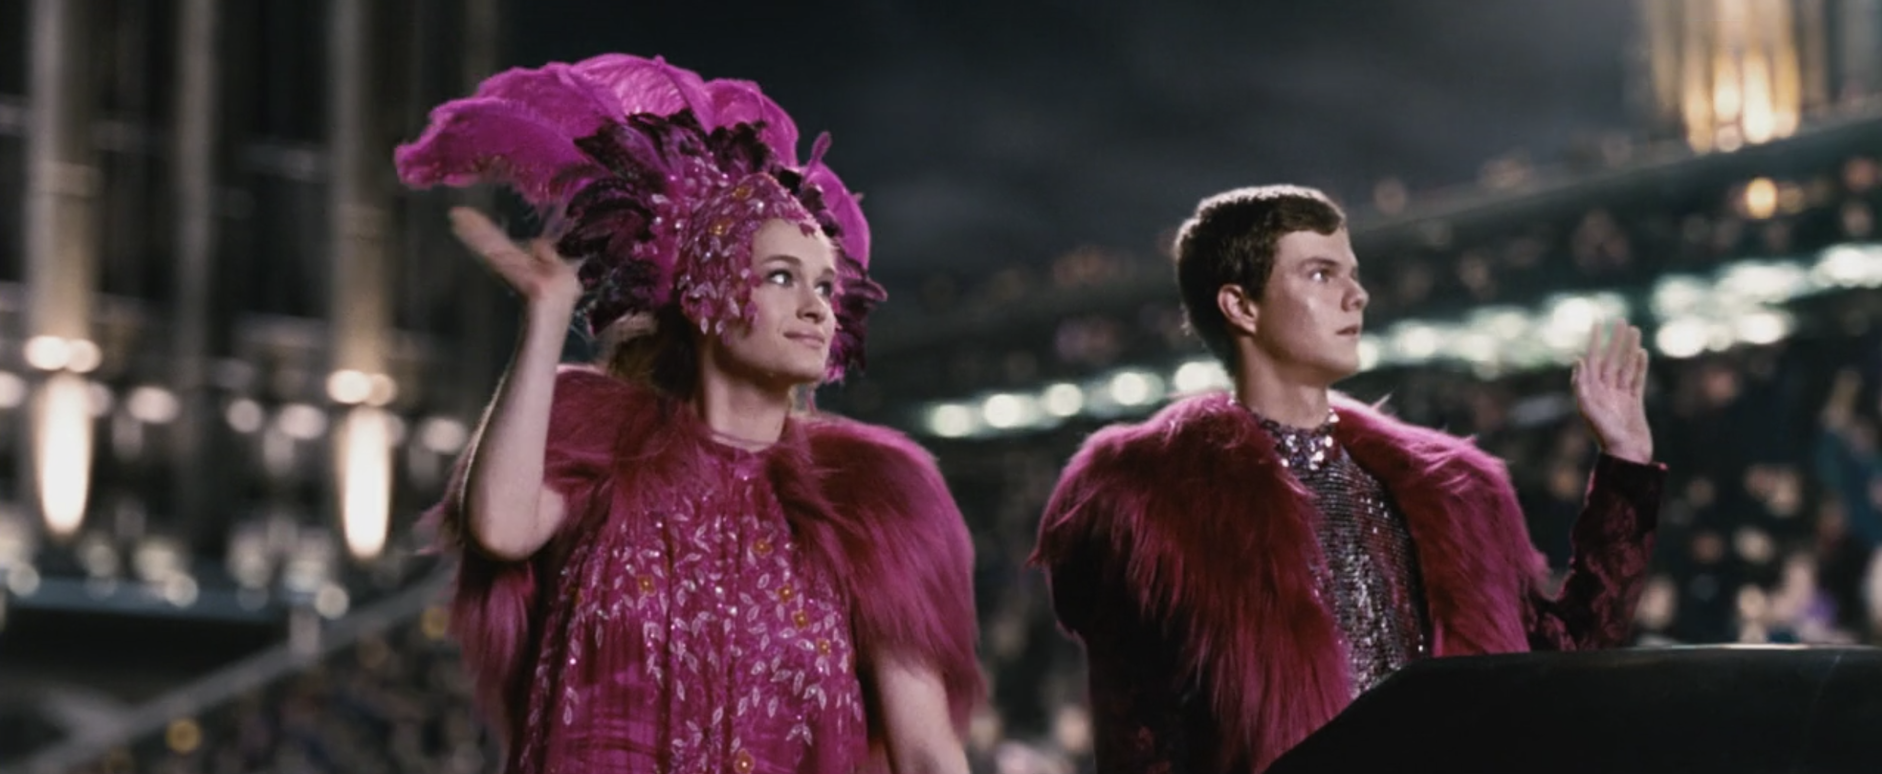 The two tributes dressed in bright pink and sequined showgirl outfits